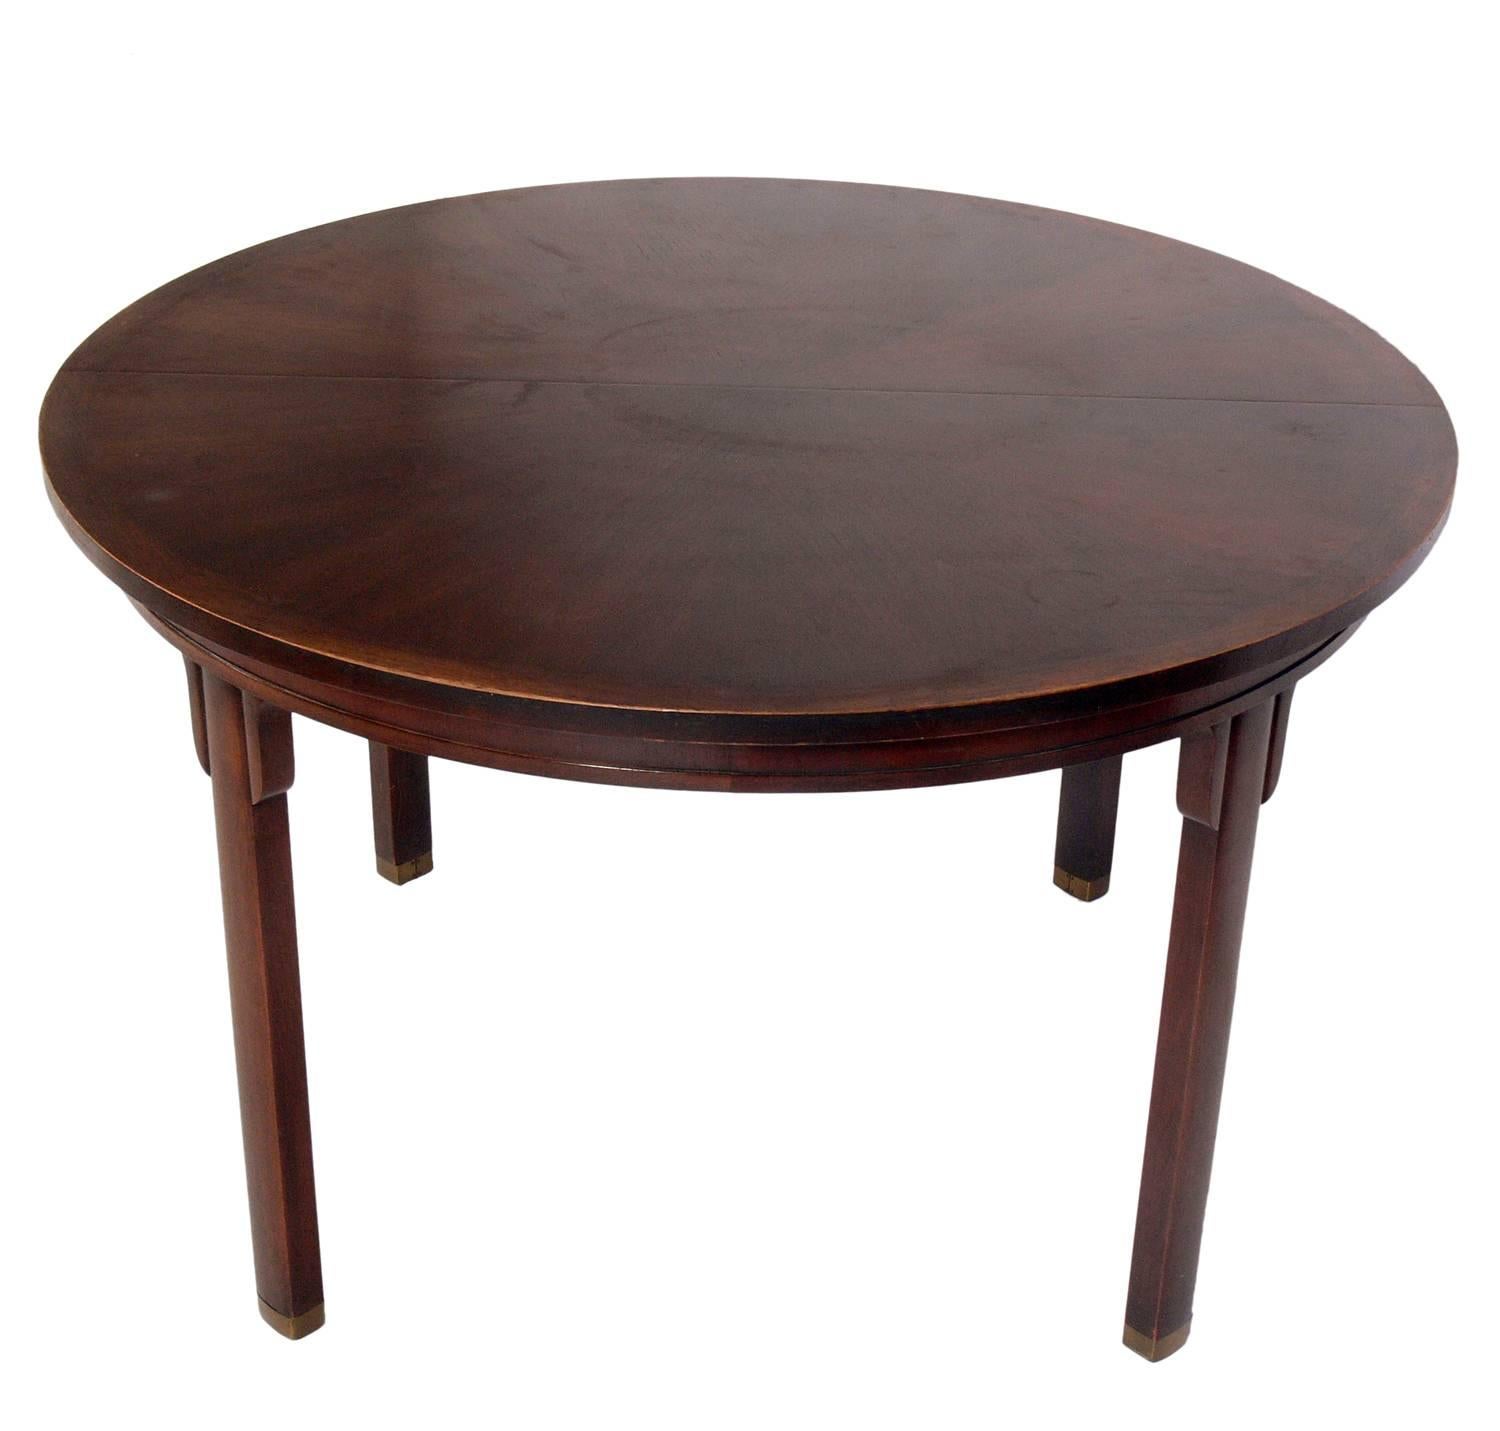 Asian inspired dining table by Michael Taylor for Baker, American, circa 1960s. This table expands from a compact 48